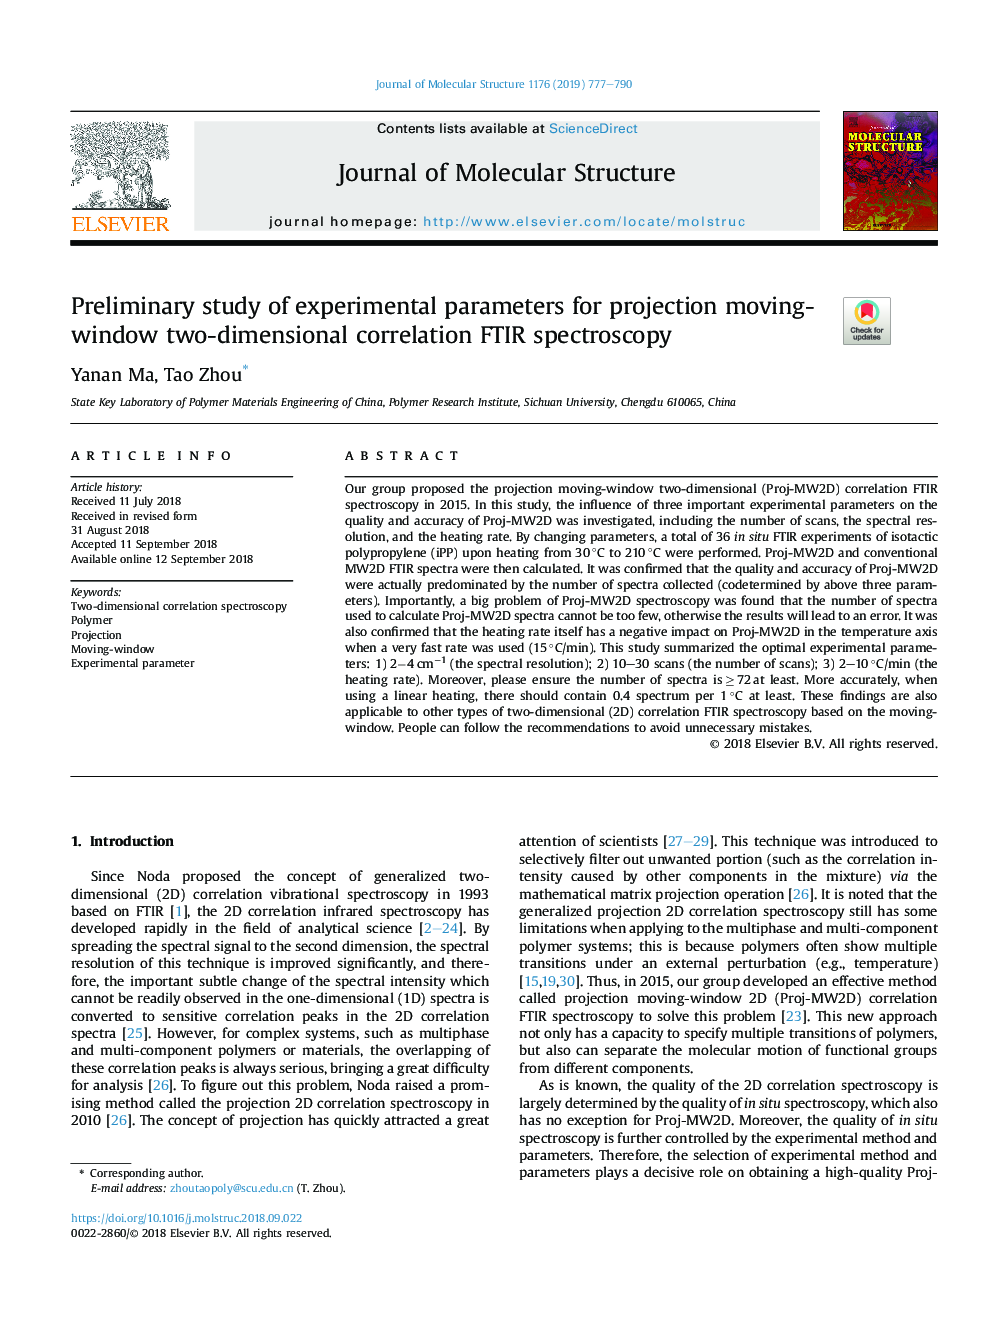 Preliminary study of experimental parameters for projection moving-window two-dimensional correlation FTIR spectroscopy